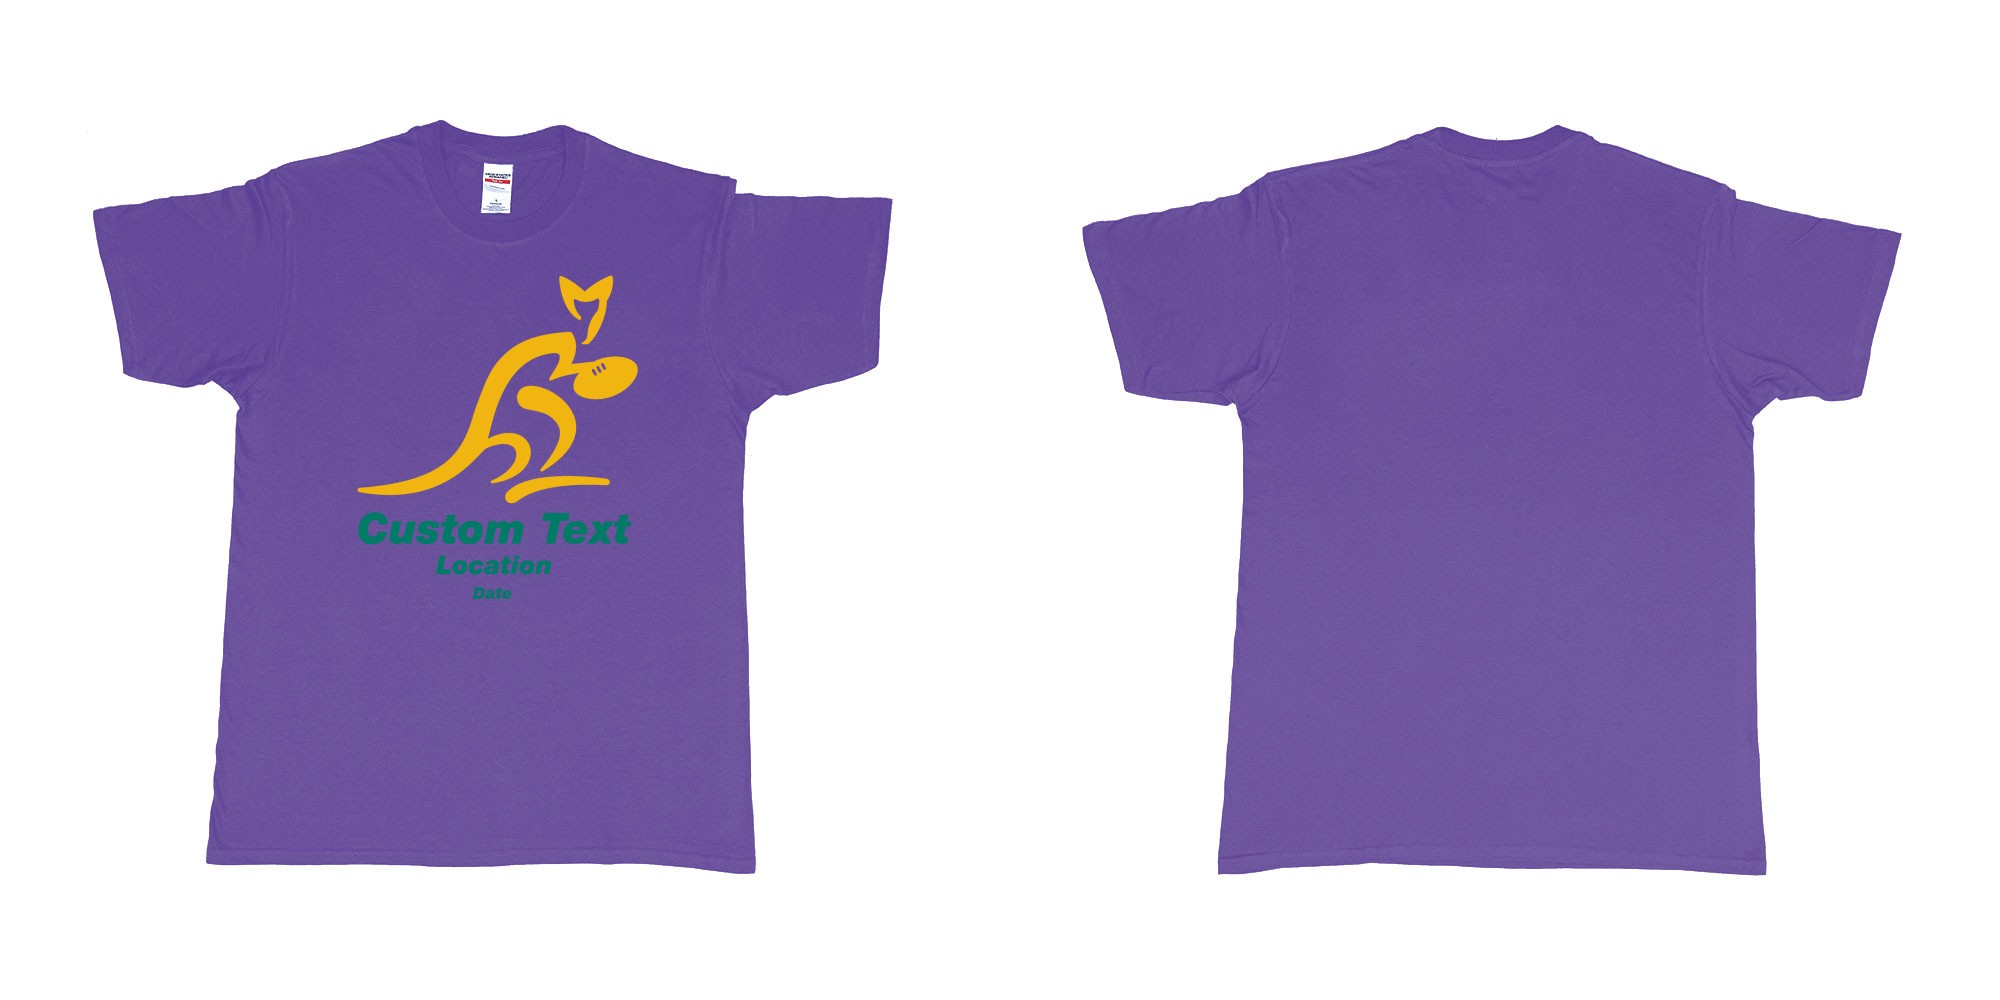 Custom tshirt design australia national rugby union team the wallabies in fabric color purple choice your own text made in Bali by The Pirate Way